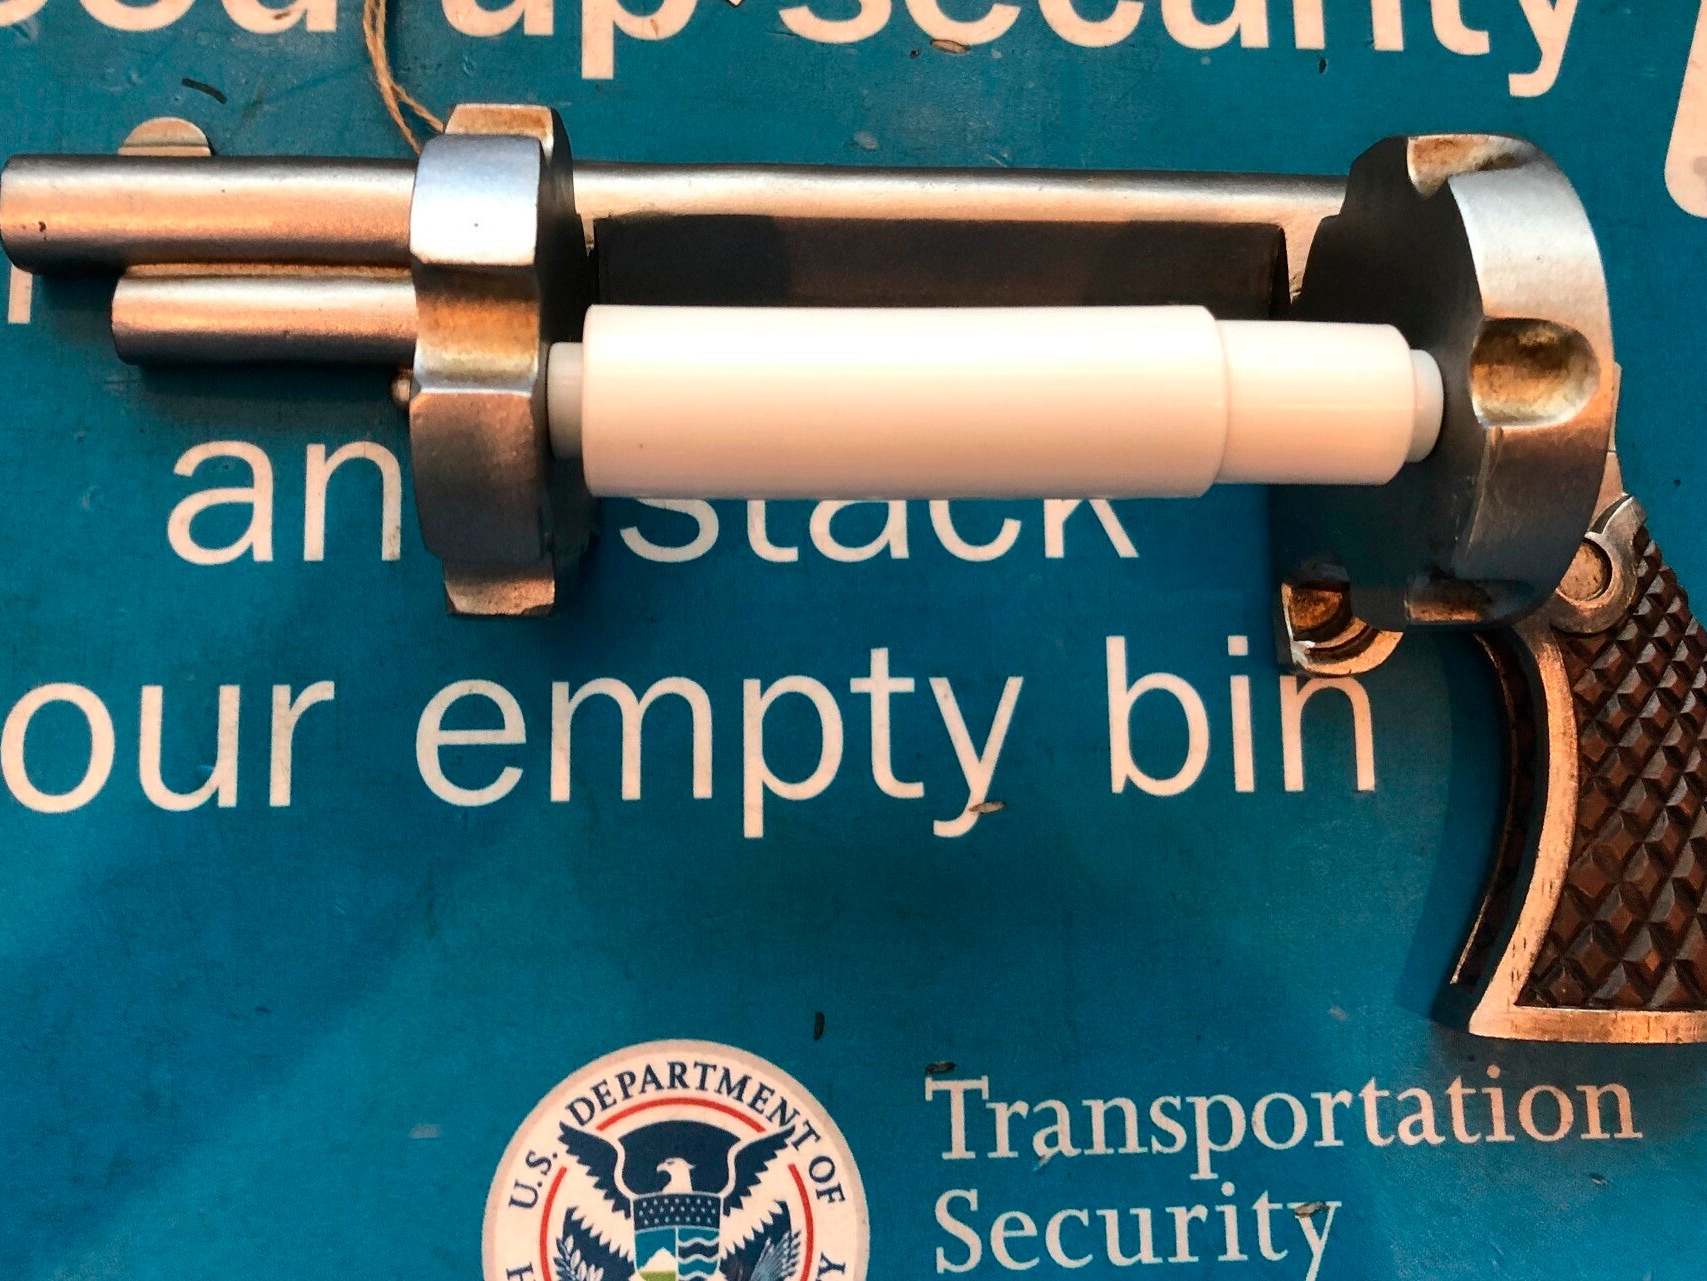 The toilet paper dispenser was confiscated at a security checkpoint at Newark Liberty International Airport